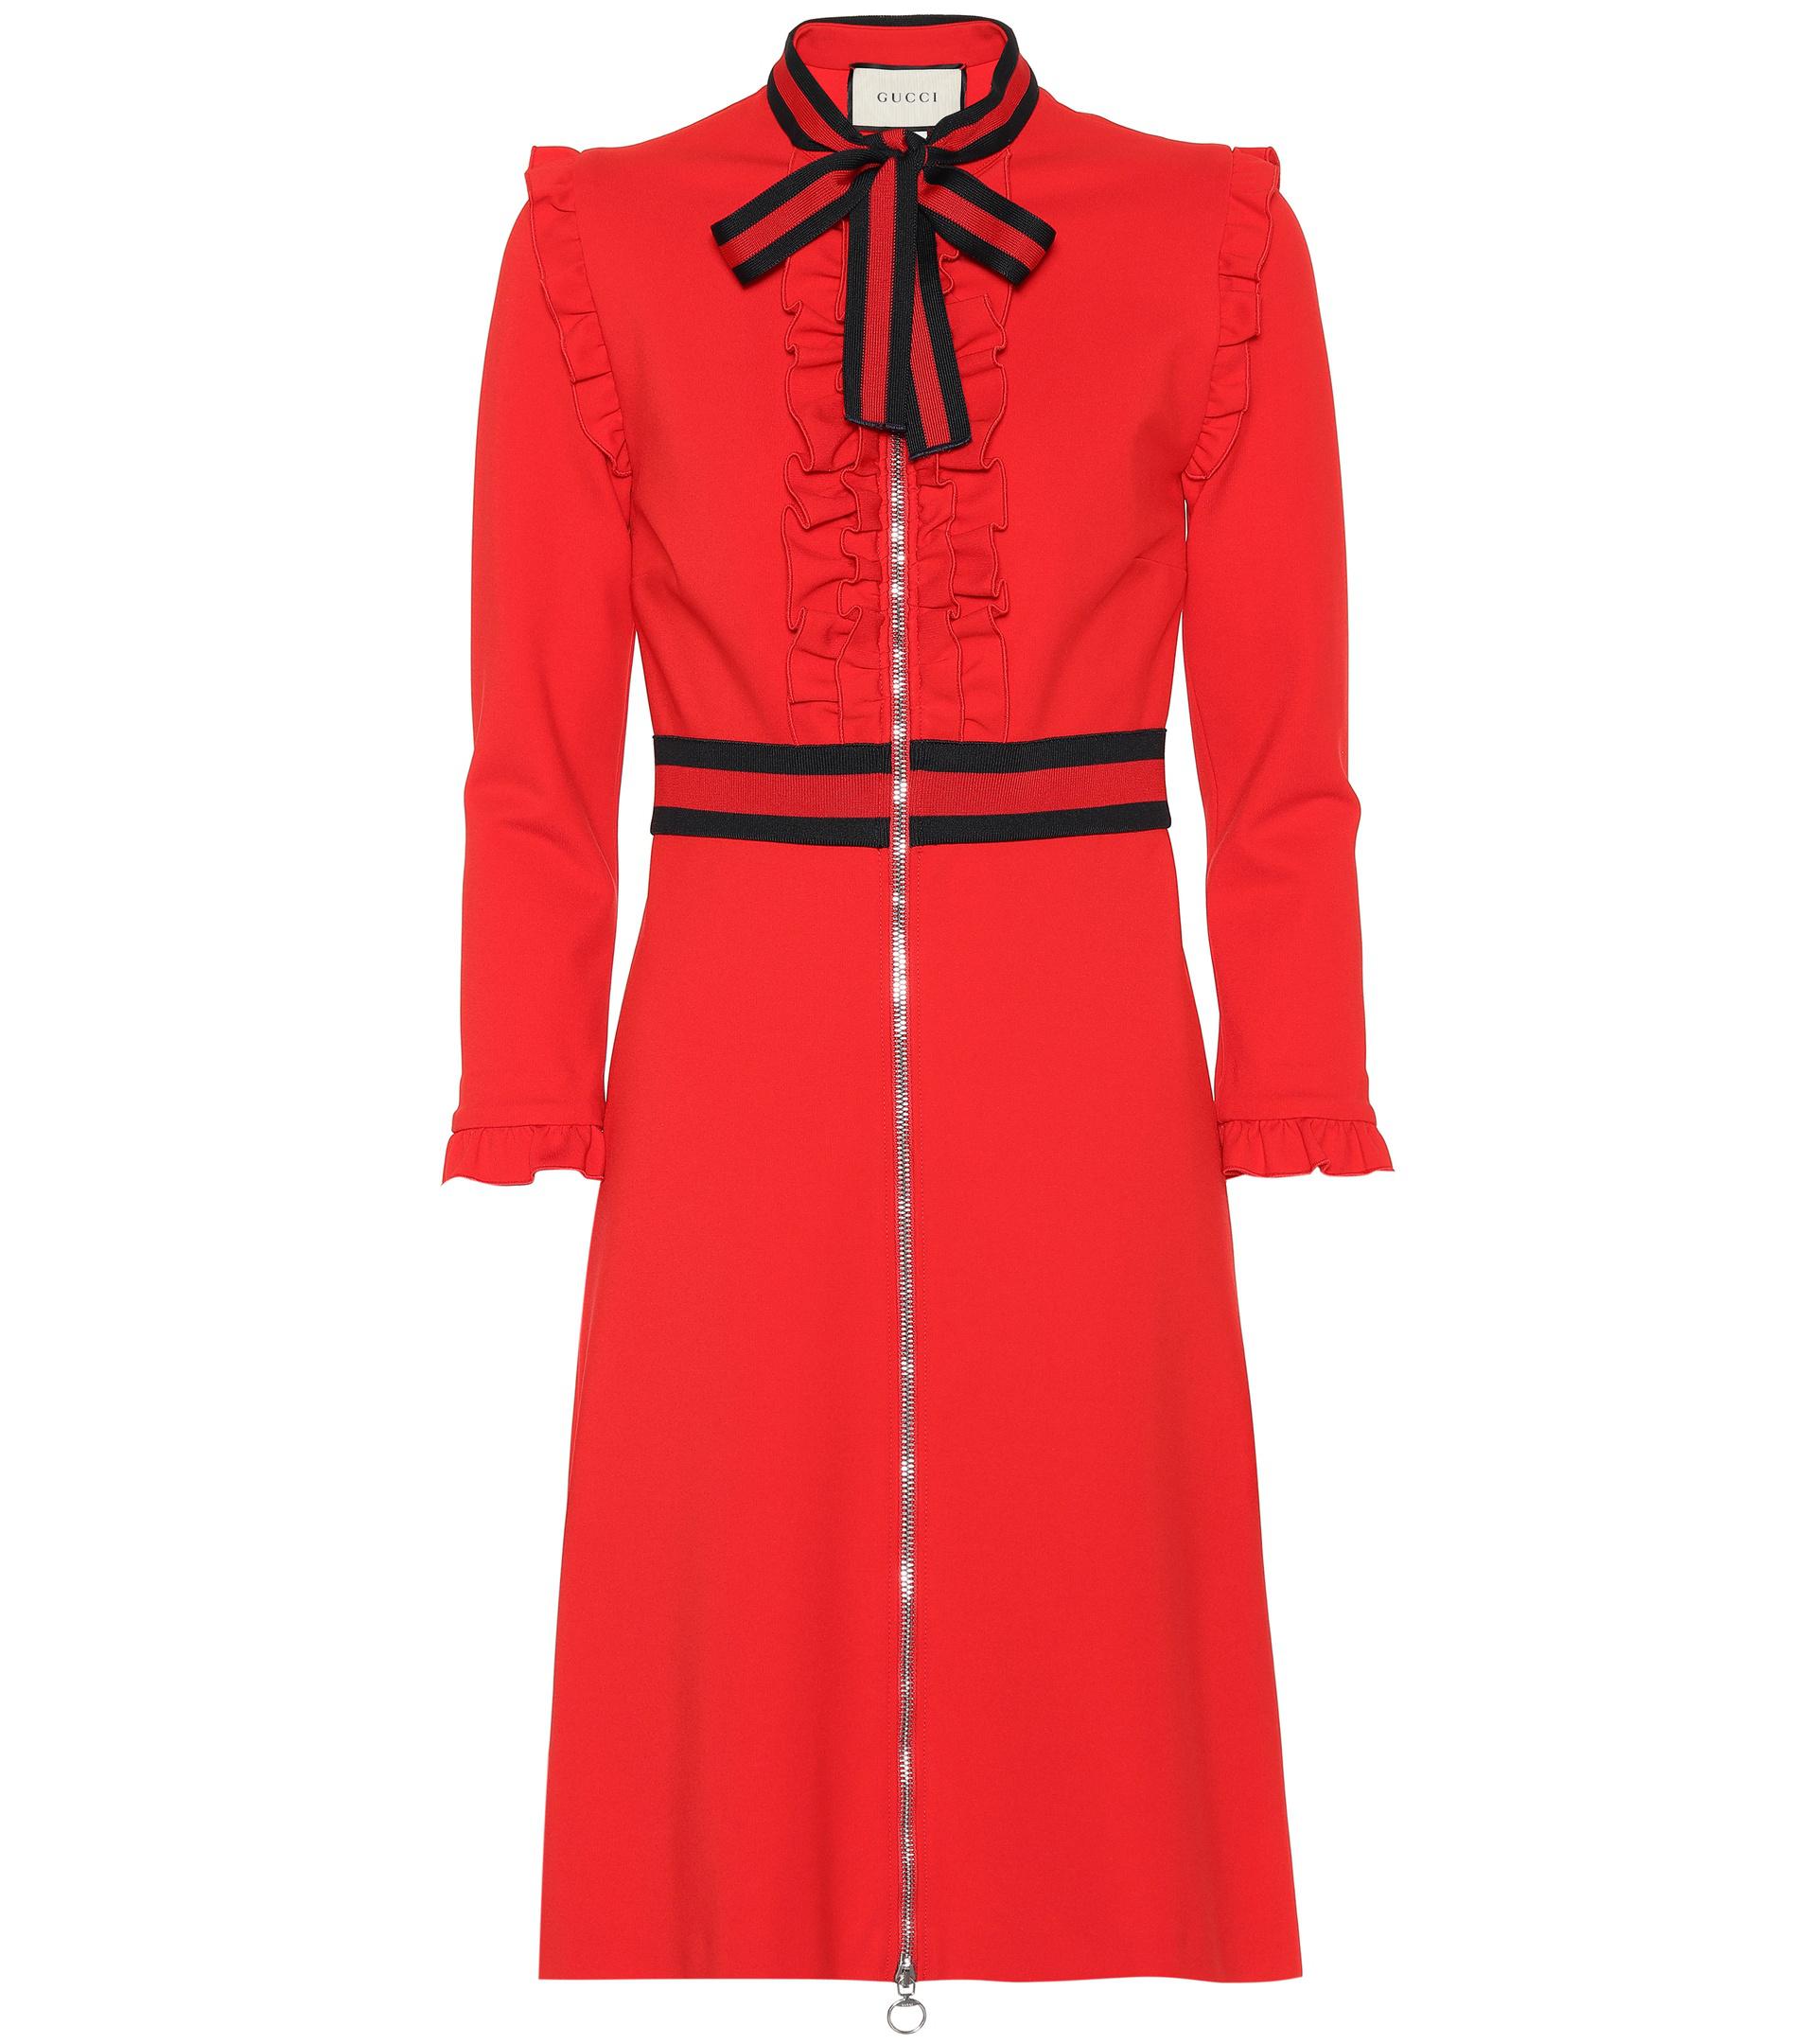 Gucci Viscose Jersey Dress in Red - Save 10% - Lyst